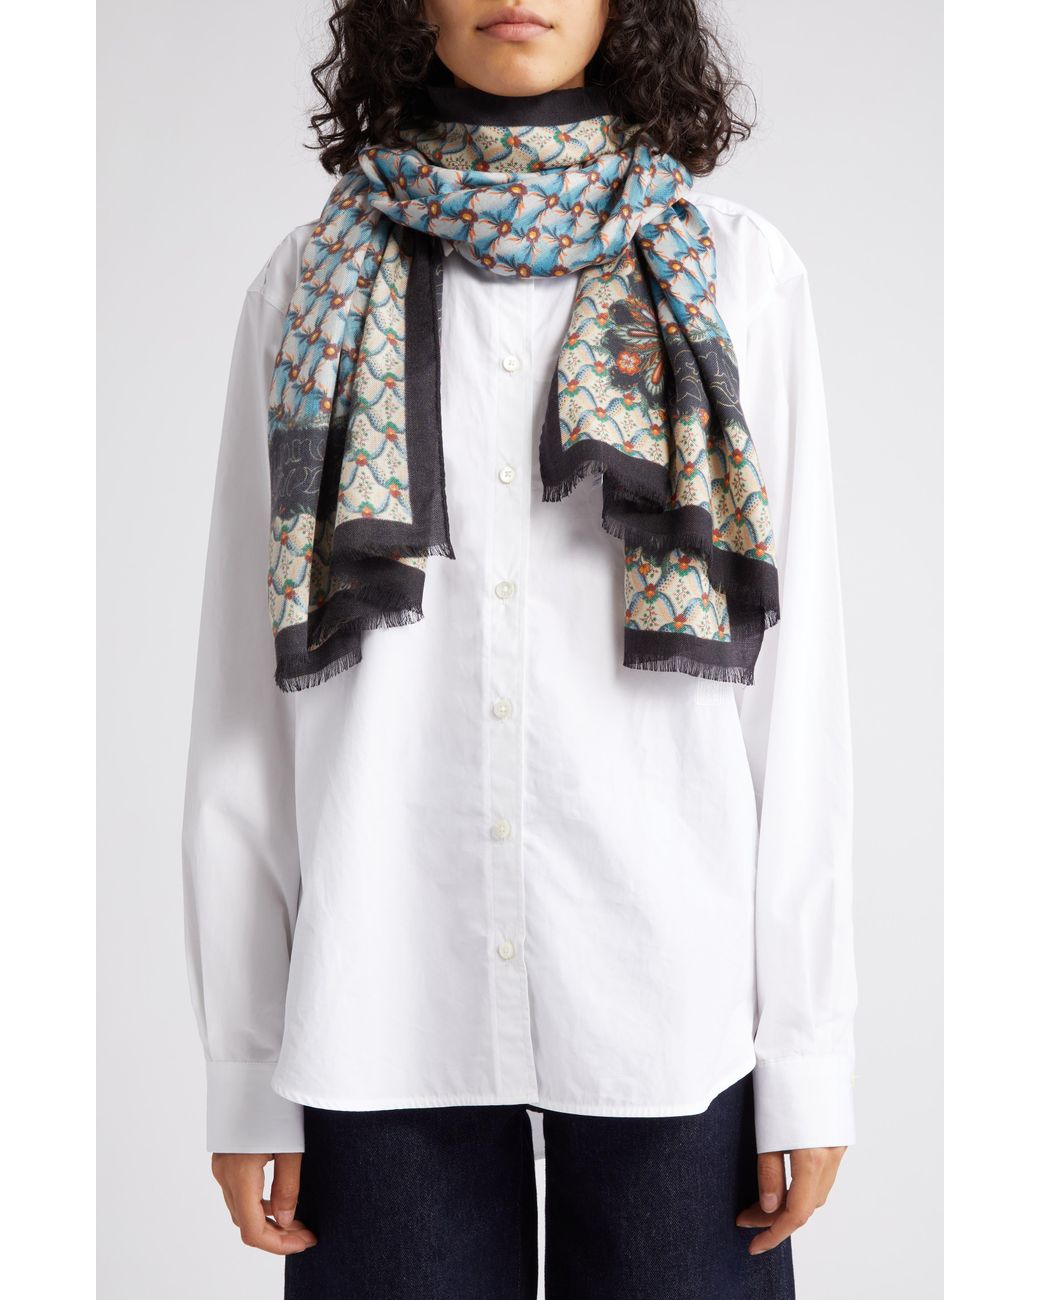 Etro Sciarpa Delhy Mixed Floral Cashmere & Silk Scarf in Gray | Lyst